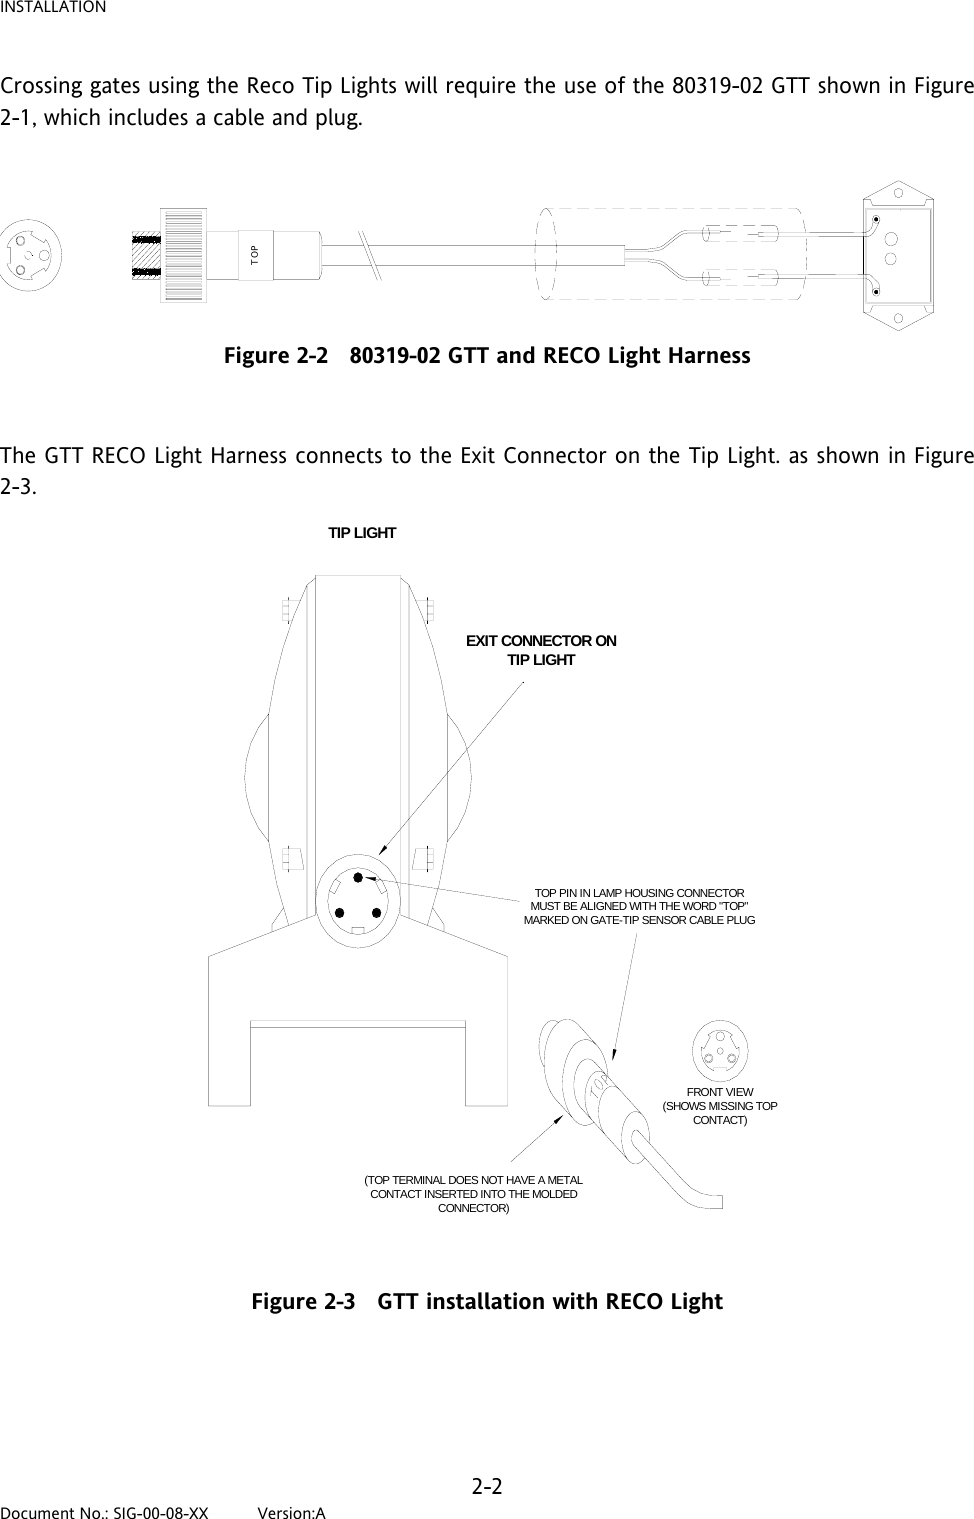 INSTALLATION Crossing gates using the Reco Tip Lights will require the use of the 80319-02 GTT shown in Figure 2-1, which includes a cable and plug.   Figure 2-2   80319-02 GTT and RECO Light Harness  The GTT RECO Light Harness connects to the Exit Connector on the Tip Light. as shown in Figure 2-3. TOPTOP PIN IN LAMP HOUSING CONNECTORMUST BE ALIGNED WITH THE WORD &quot;TOP&quot;MARKED ON GATE-TIP SENSOR CABLE PLUGTIP LIGHTEXIT CONNECTOR ONTIP LIGHTFRONT VIEW(SHOWS MISSING TOPCONTACT)(TOP TERMINAL DOES NOT HAVE A METALCONTACT INSERTED INTO THE MOLDEDCONNECTOR) Figure 2-3   GTT installation with RECO Light   2-2 Document No.: SIG-00-08-XX          Version:A 